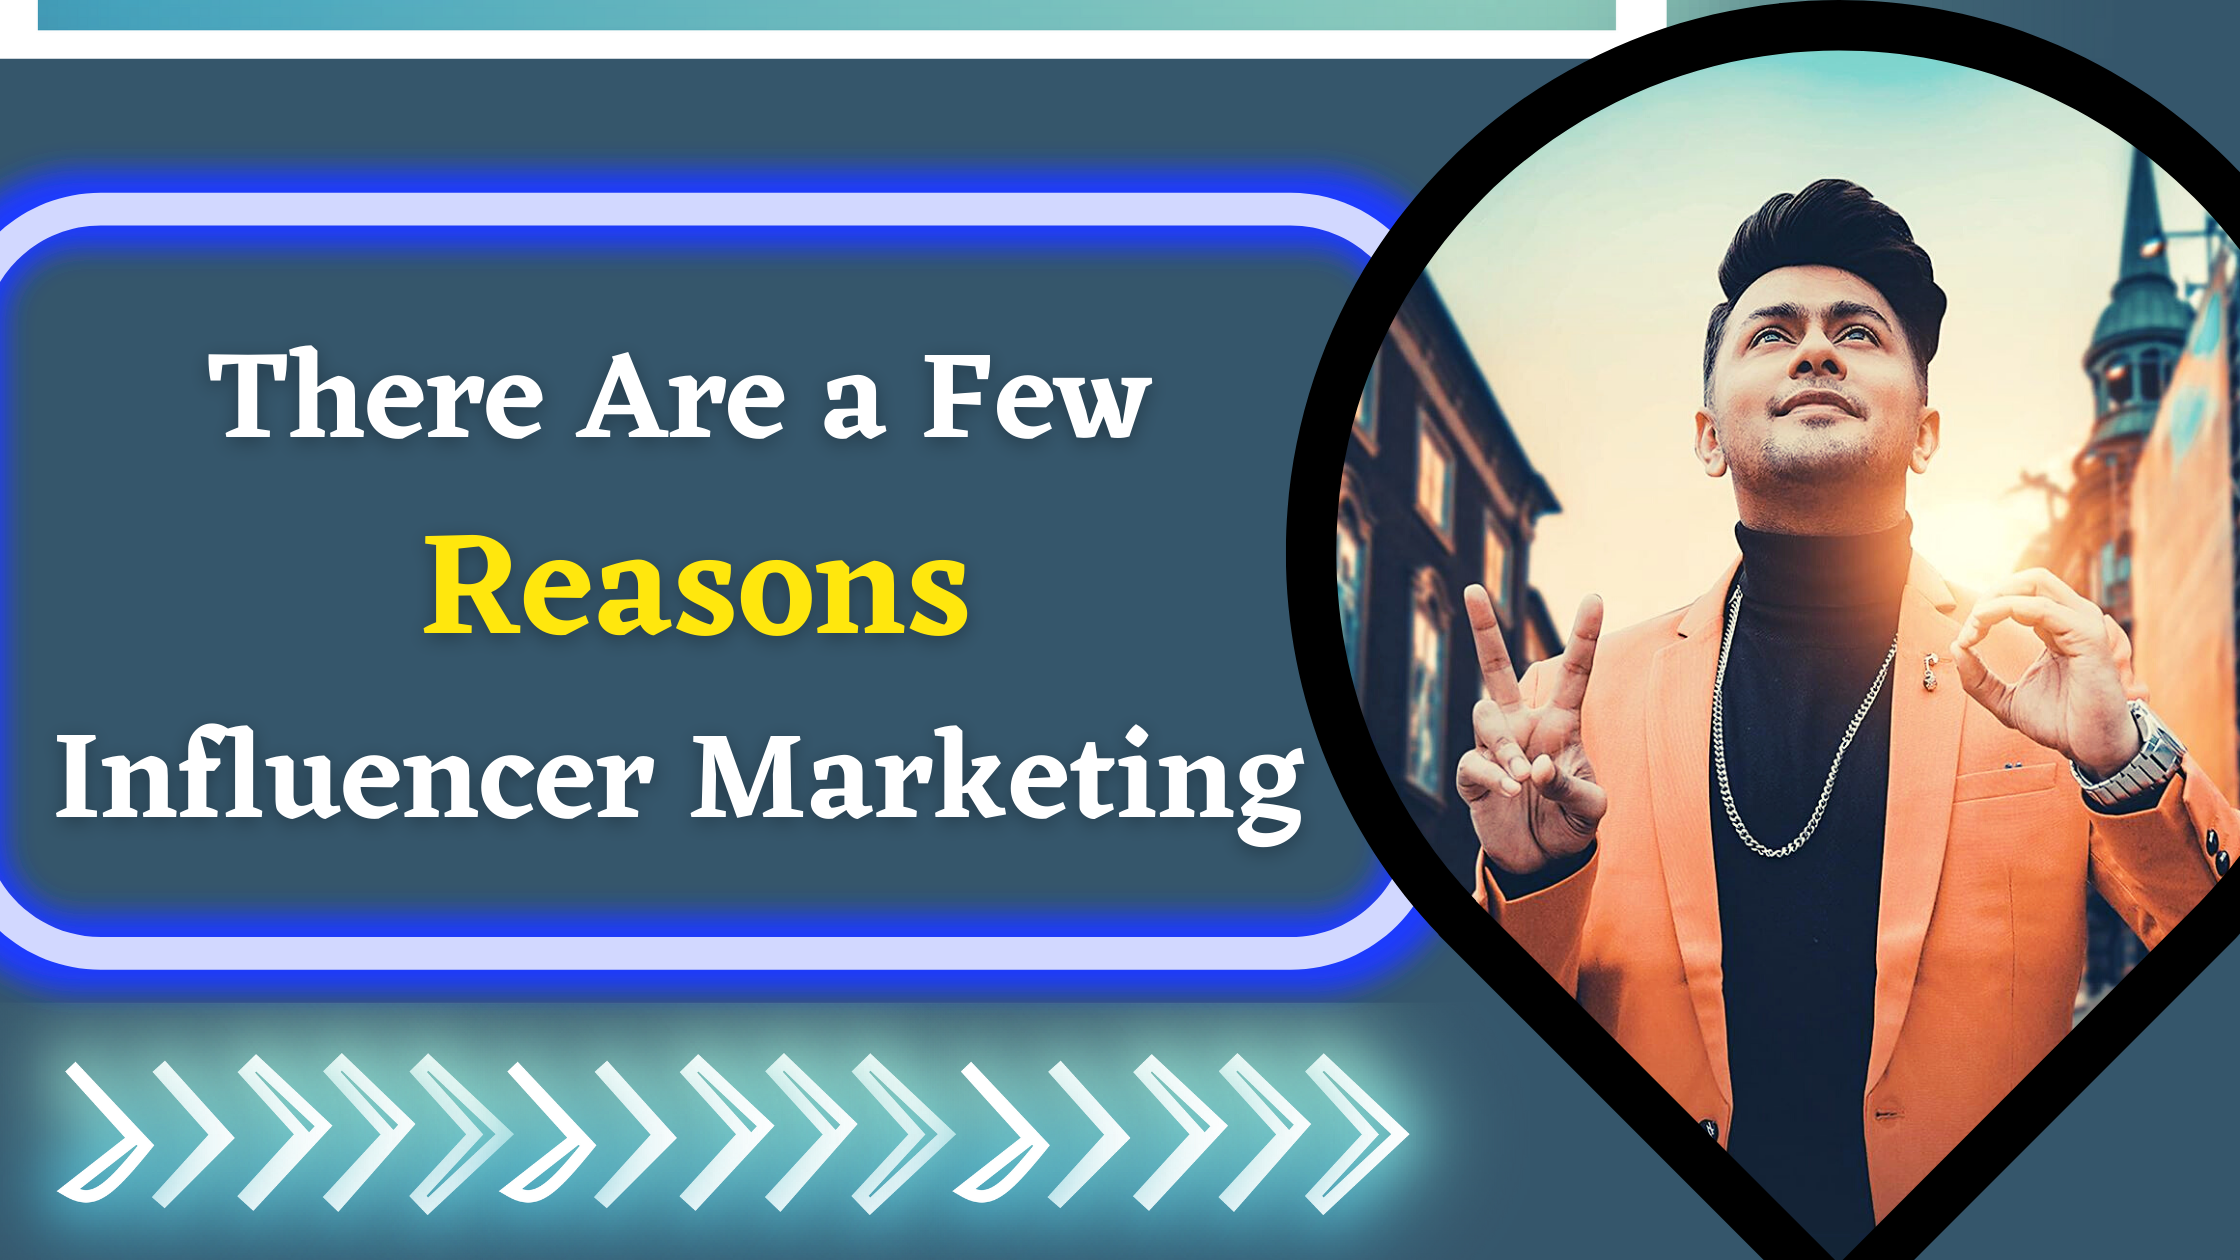 There Are a Few Reasons Influencer Marketing